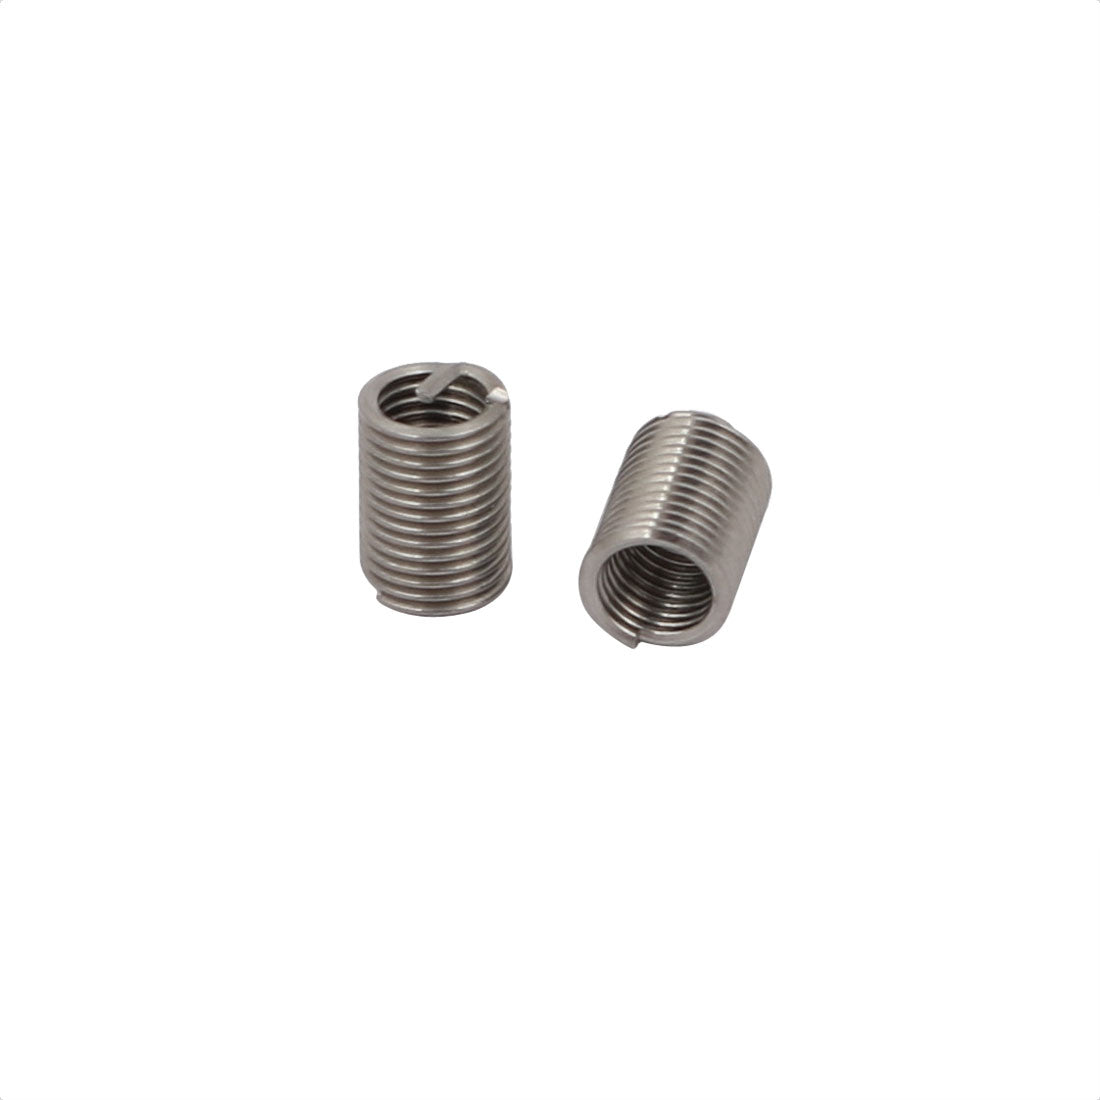 uxcell Uxcell M3x0.5mmx9mm(3D) 304 Stainless Steel Helical Coil Wire Thread Insert 50pcs